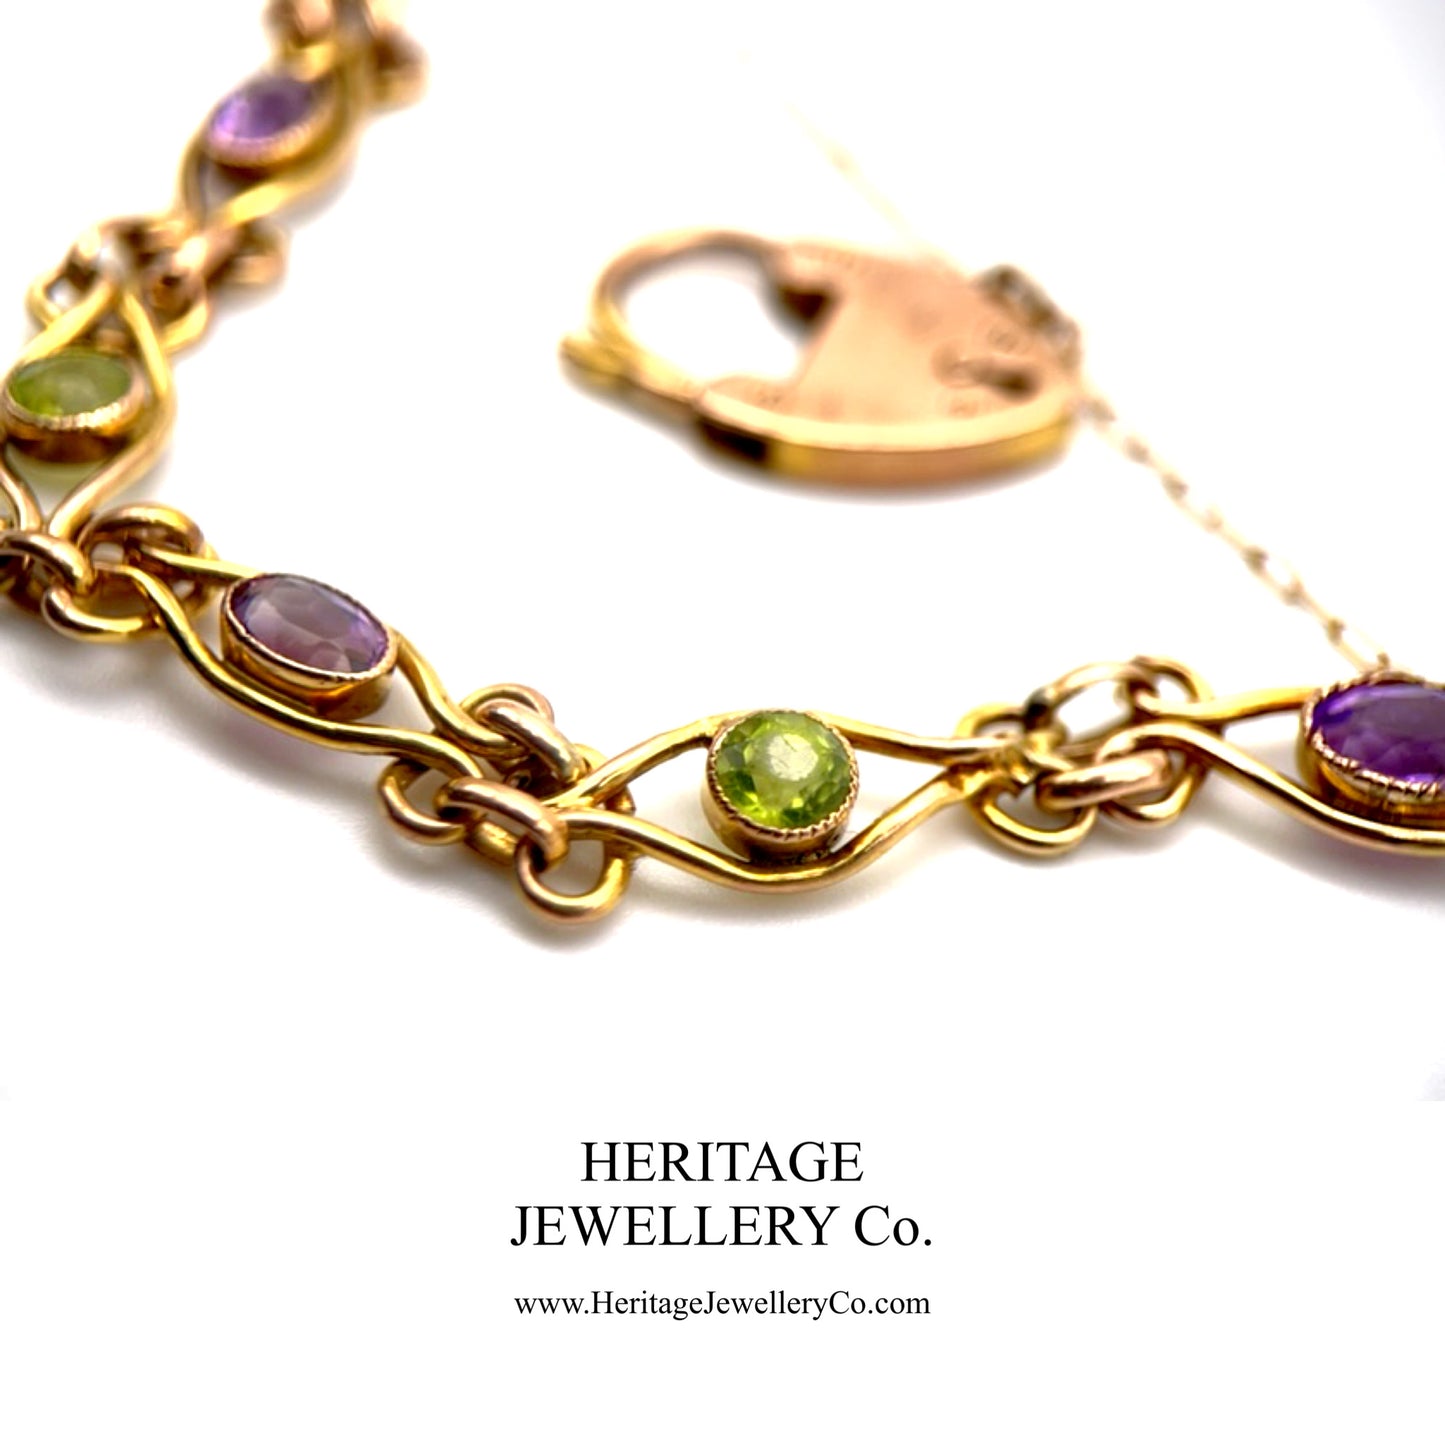 Antique Suffragette Bracelet with Peridot and Amethyst with Heart Padlock